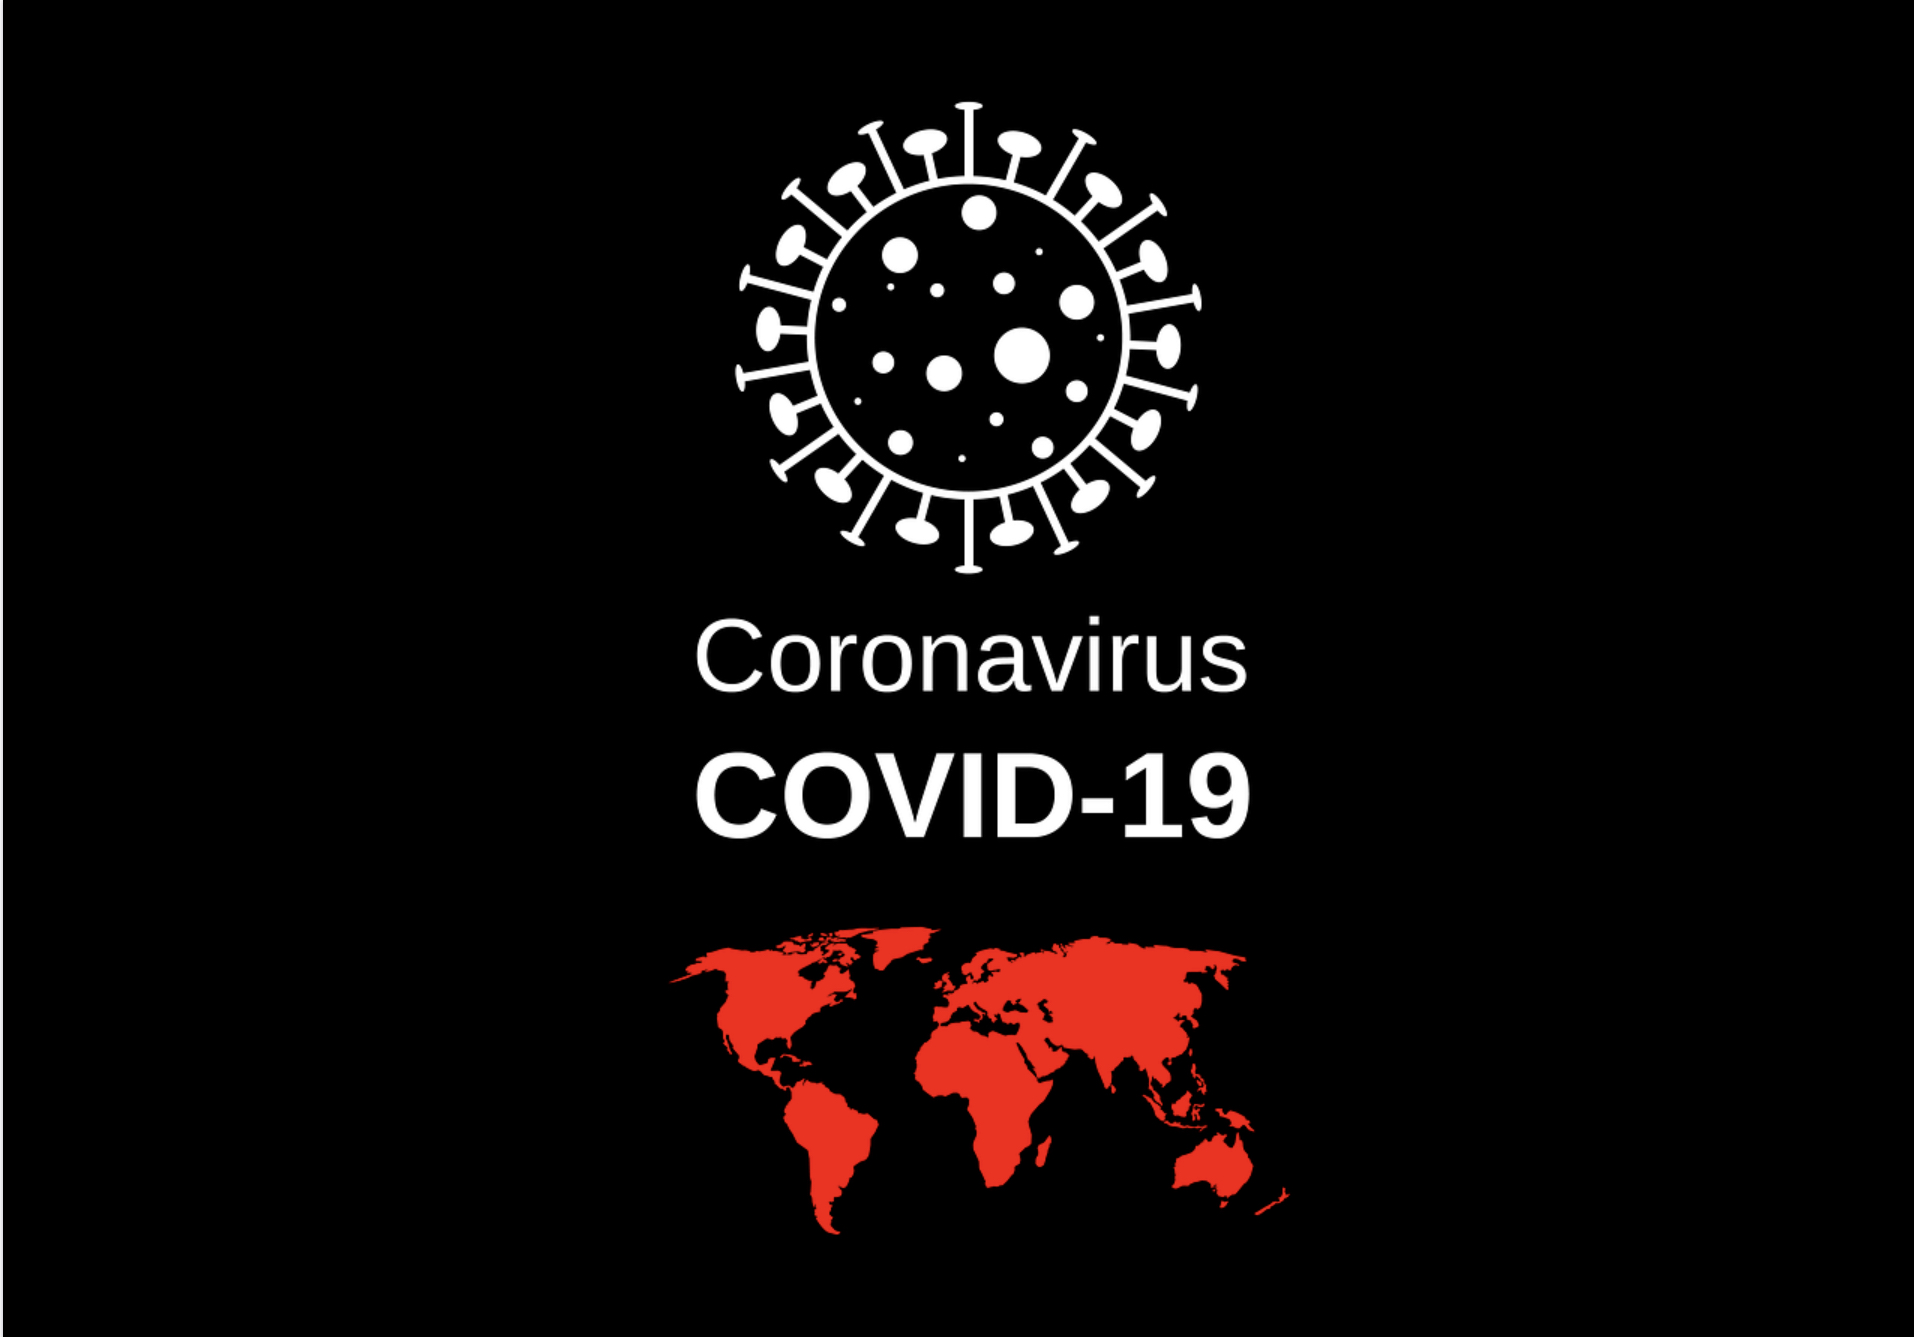 GOVERNOR CUOMO ACCEPTS RECOMMENDATION OF STATE HEALTH COMMISSIONER FOR NEW EMERGENCY MEASURES TO CONTAIN NOVEL CORONAVIRUS CLUSTER IN NEW ROCHELLE